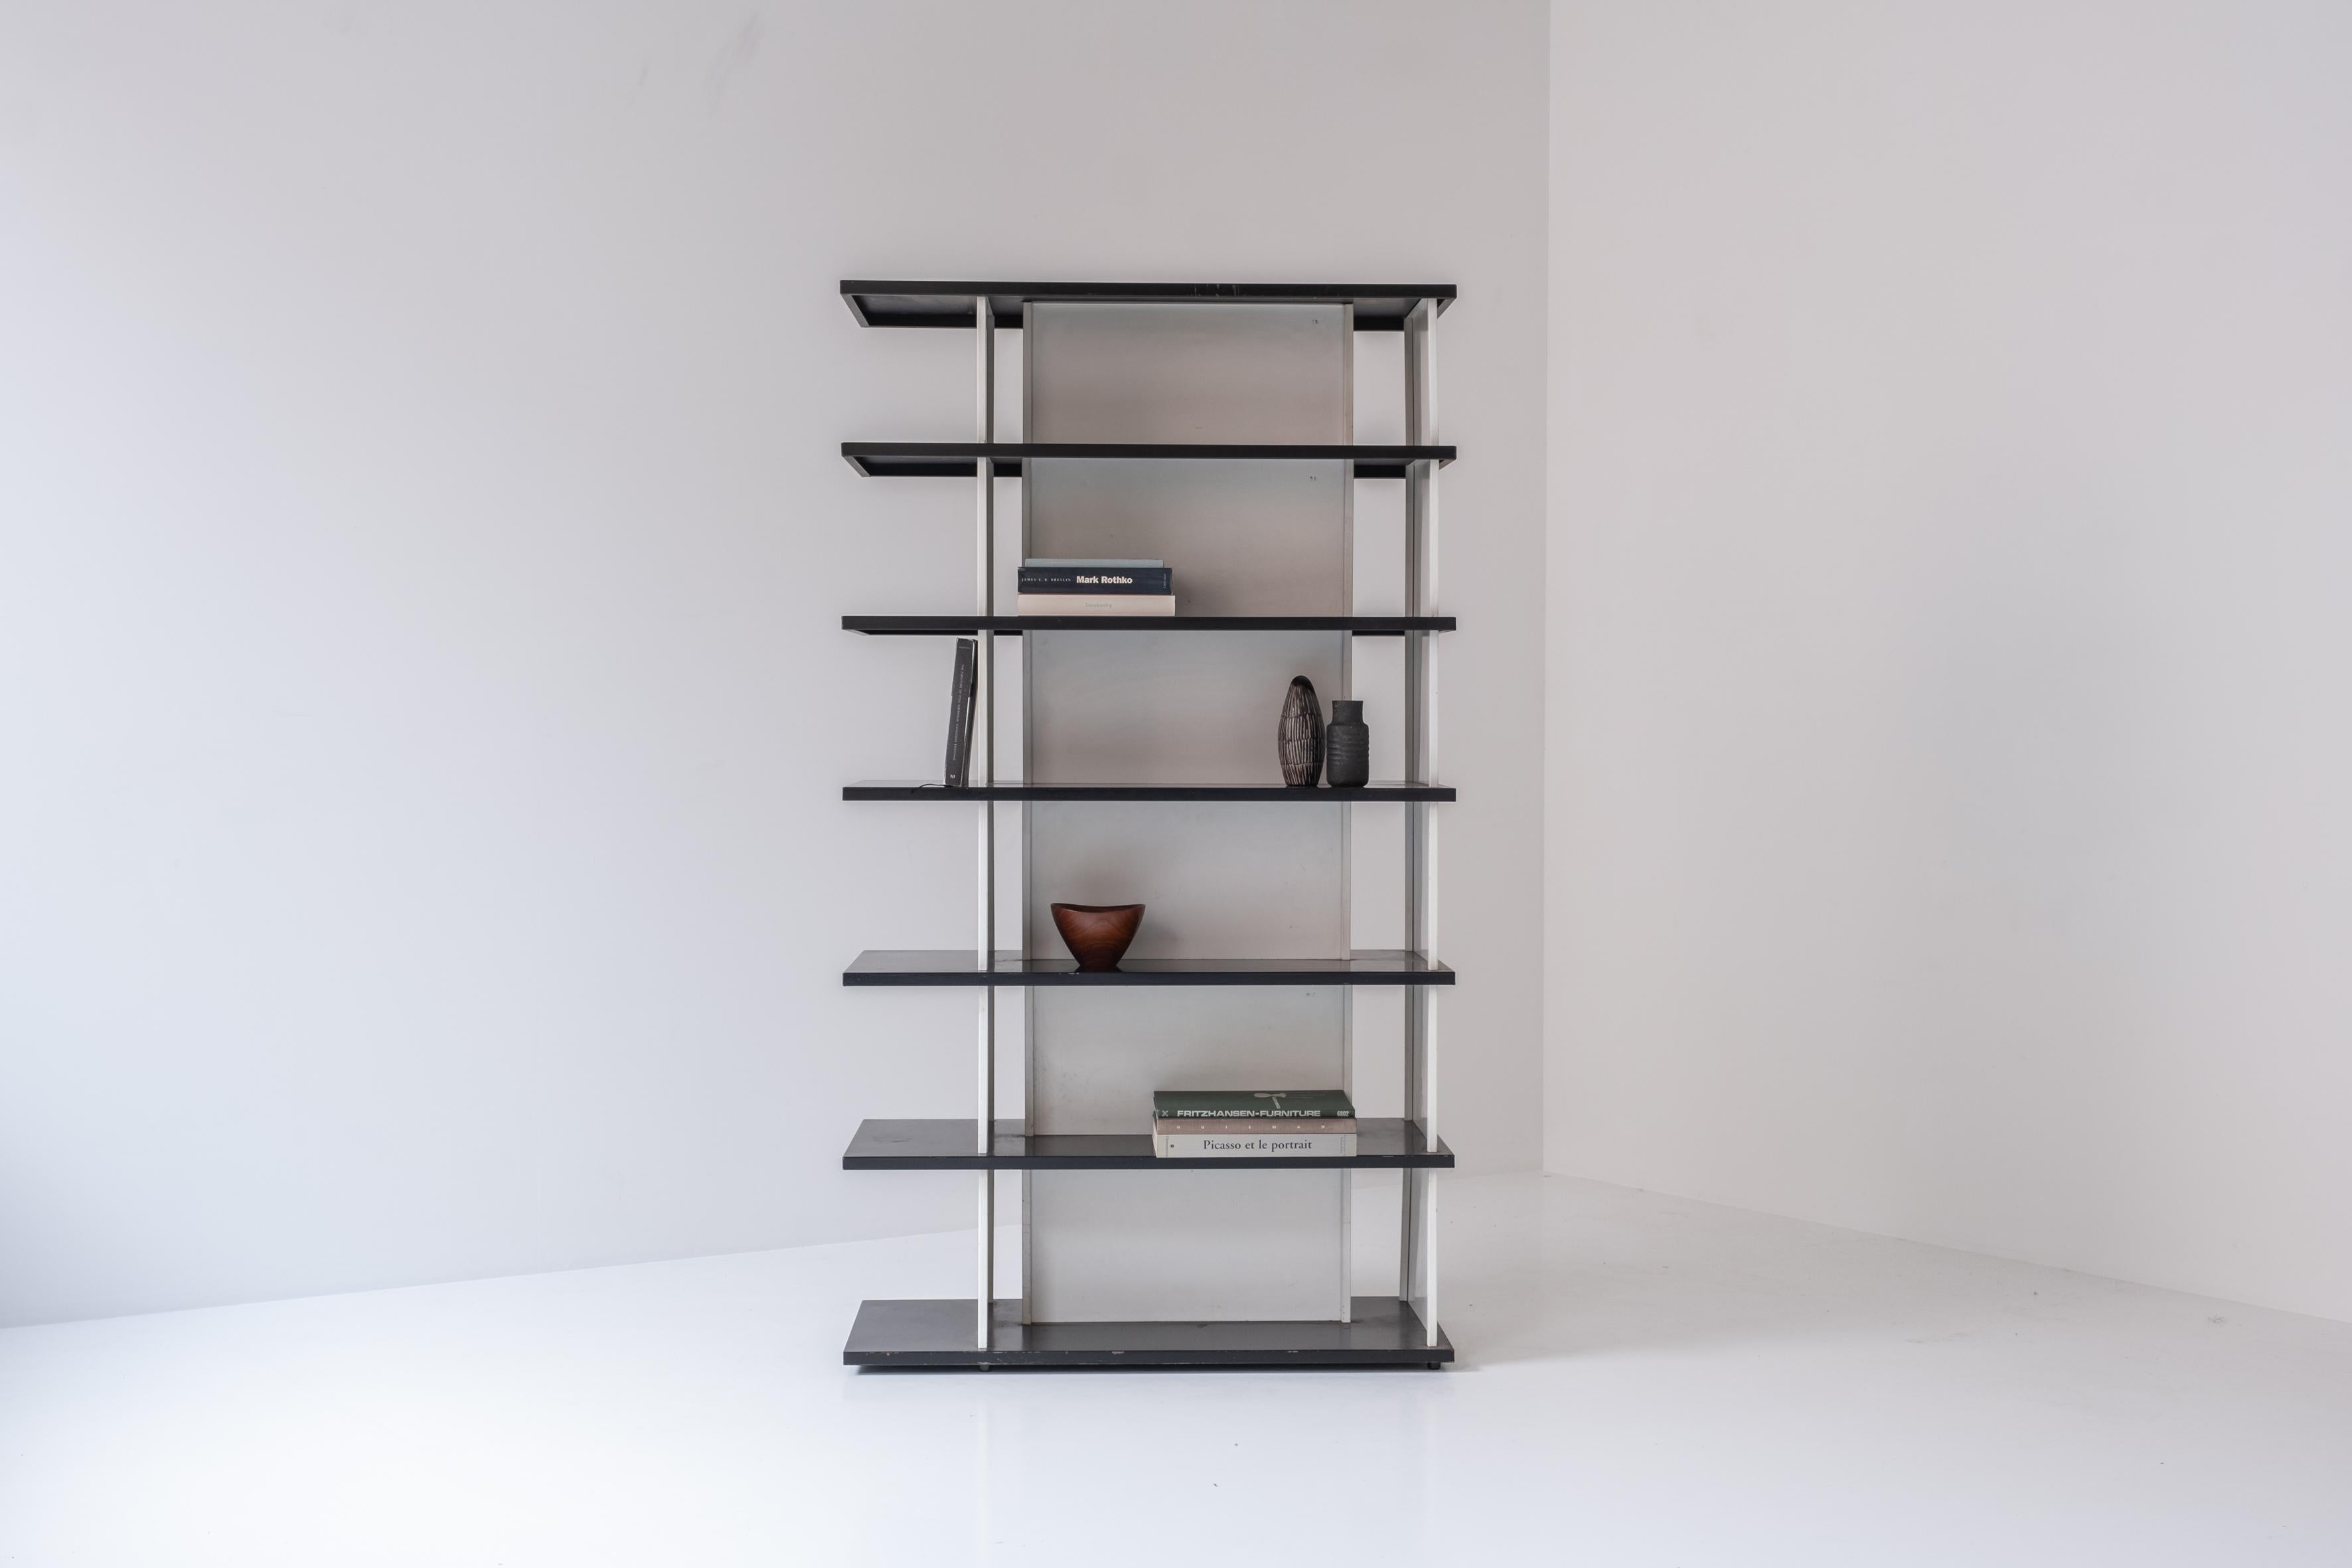 Impressive bookcase / room divider designed by Wim Rietveld for De Bijenkorf, The Netherlands 1960s. This bookcase stands on its own, its double sided so you can also use this as a room divider. It has its original black and white lacquered color.